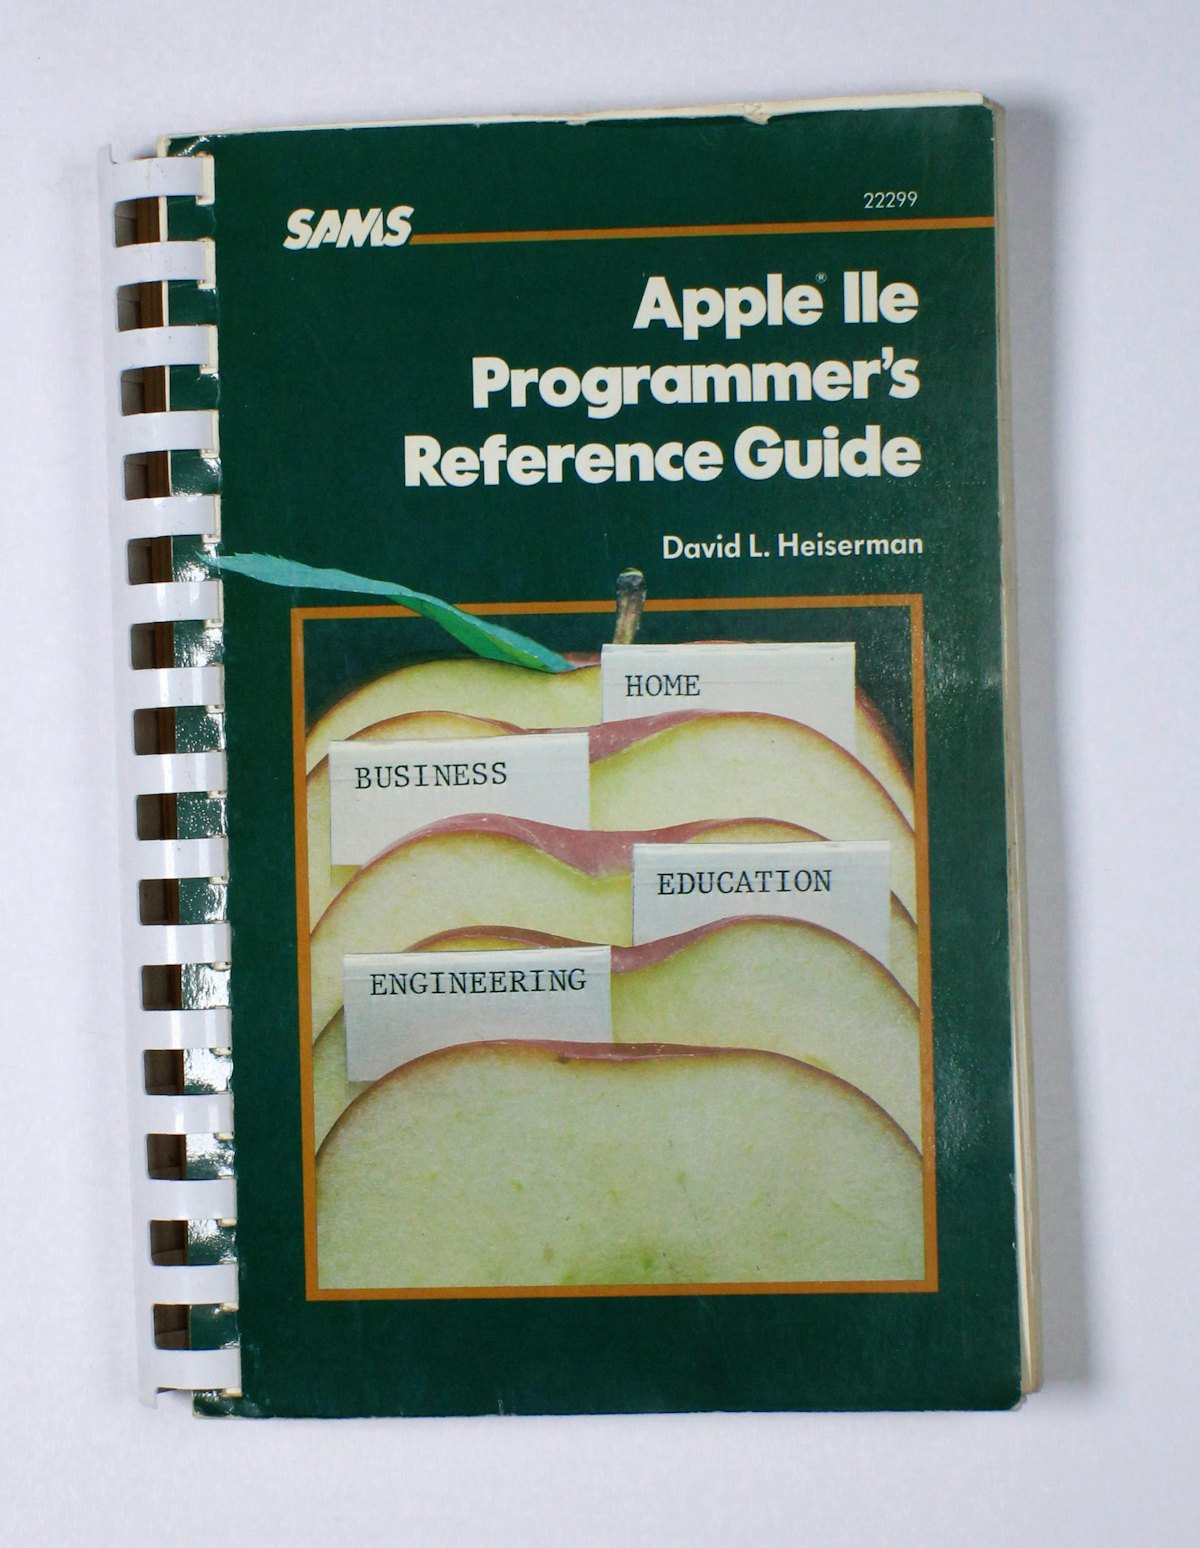 Apple IIe Programmer's Reference Guide